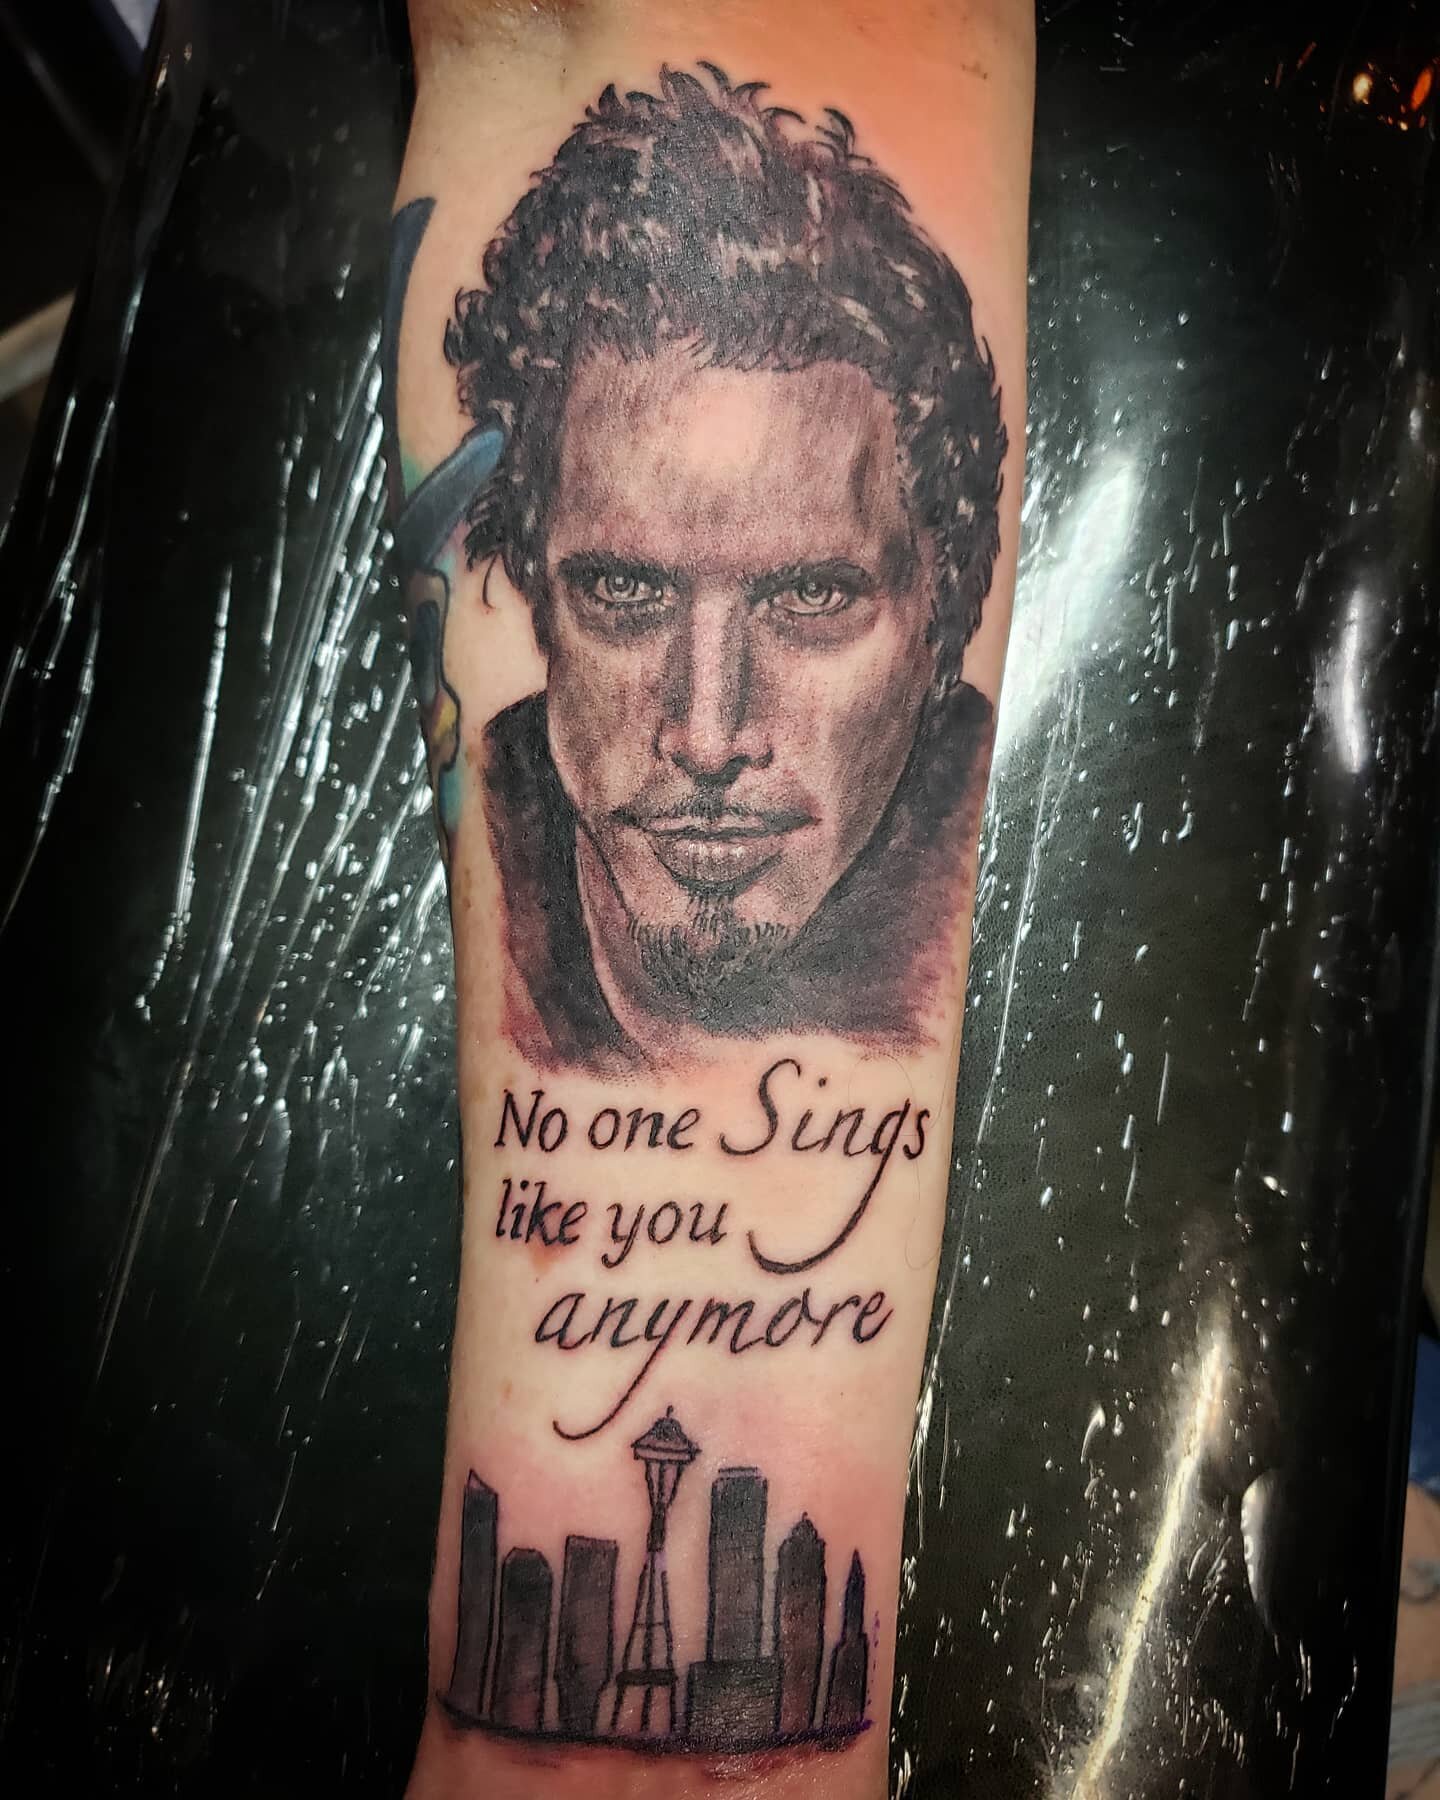 chriscornell in Tattoos  Search in 13M Tattoos Now  Tattoodo